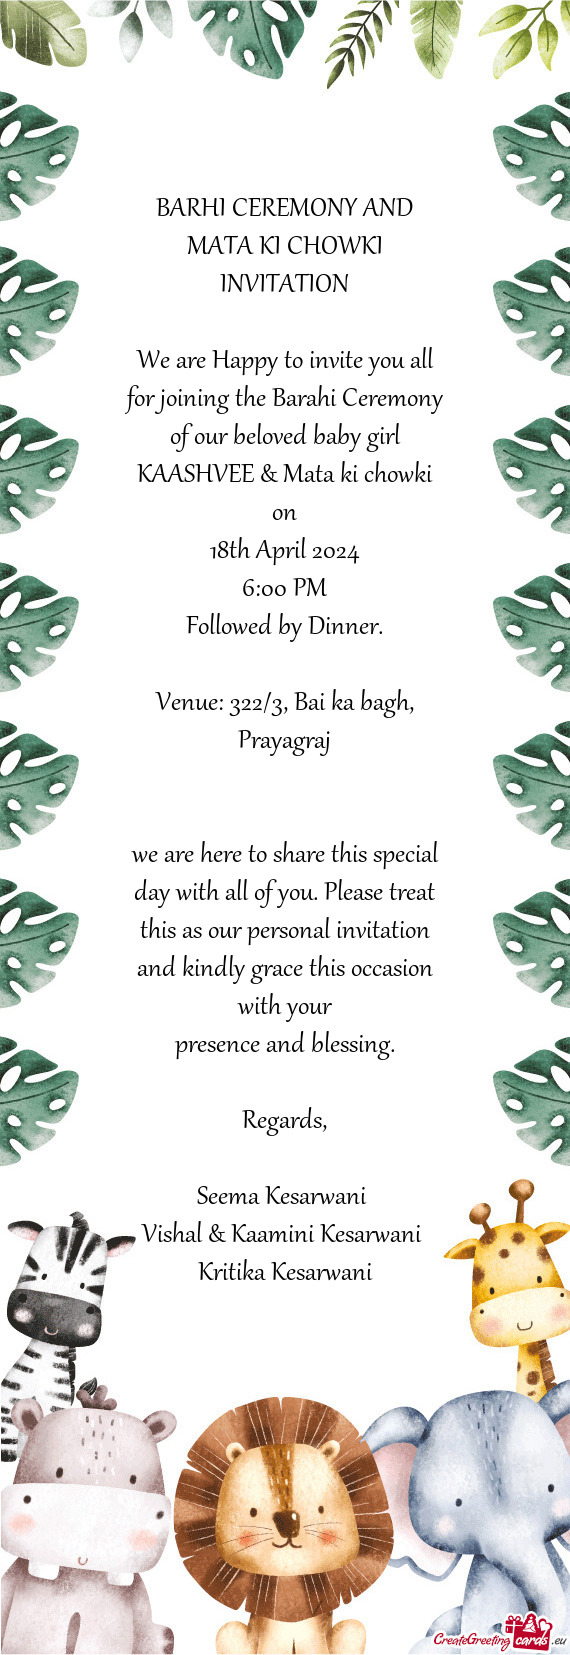 We are Happy to invite you all for joining the Barahi Ceremony of our beloved baby girl KAASHVEE & M